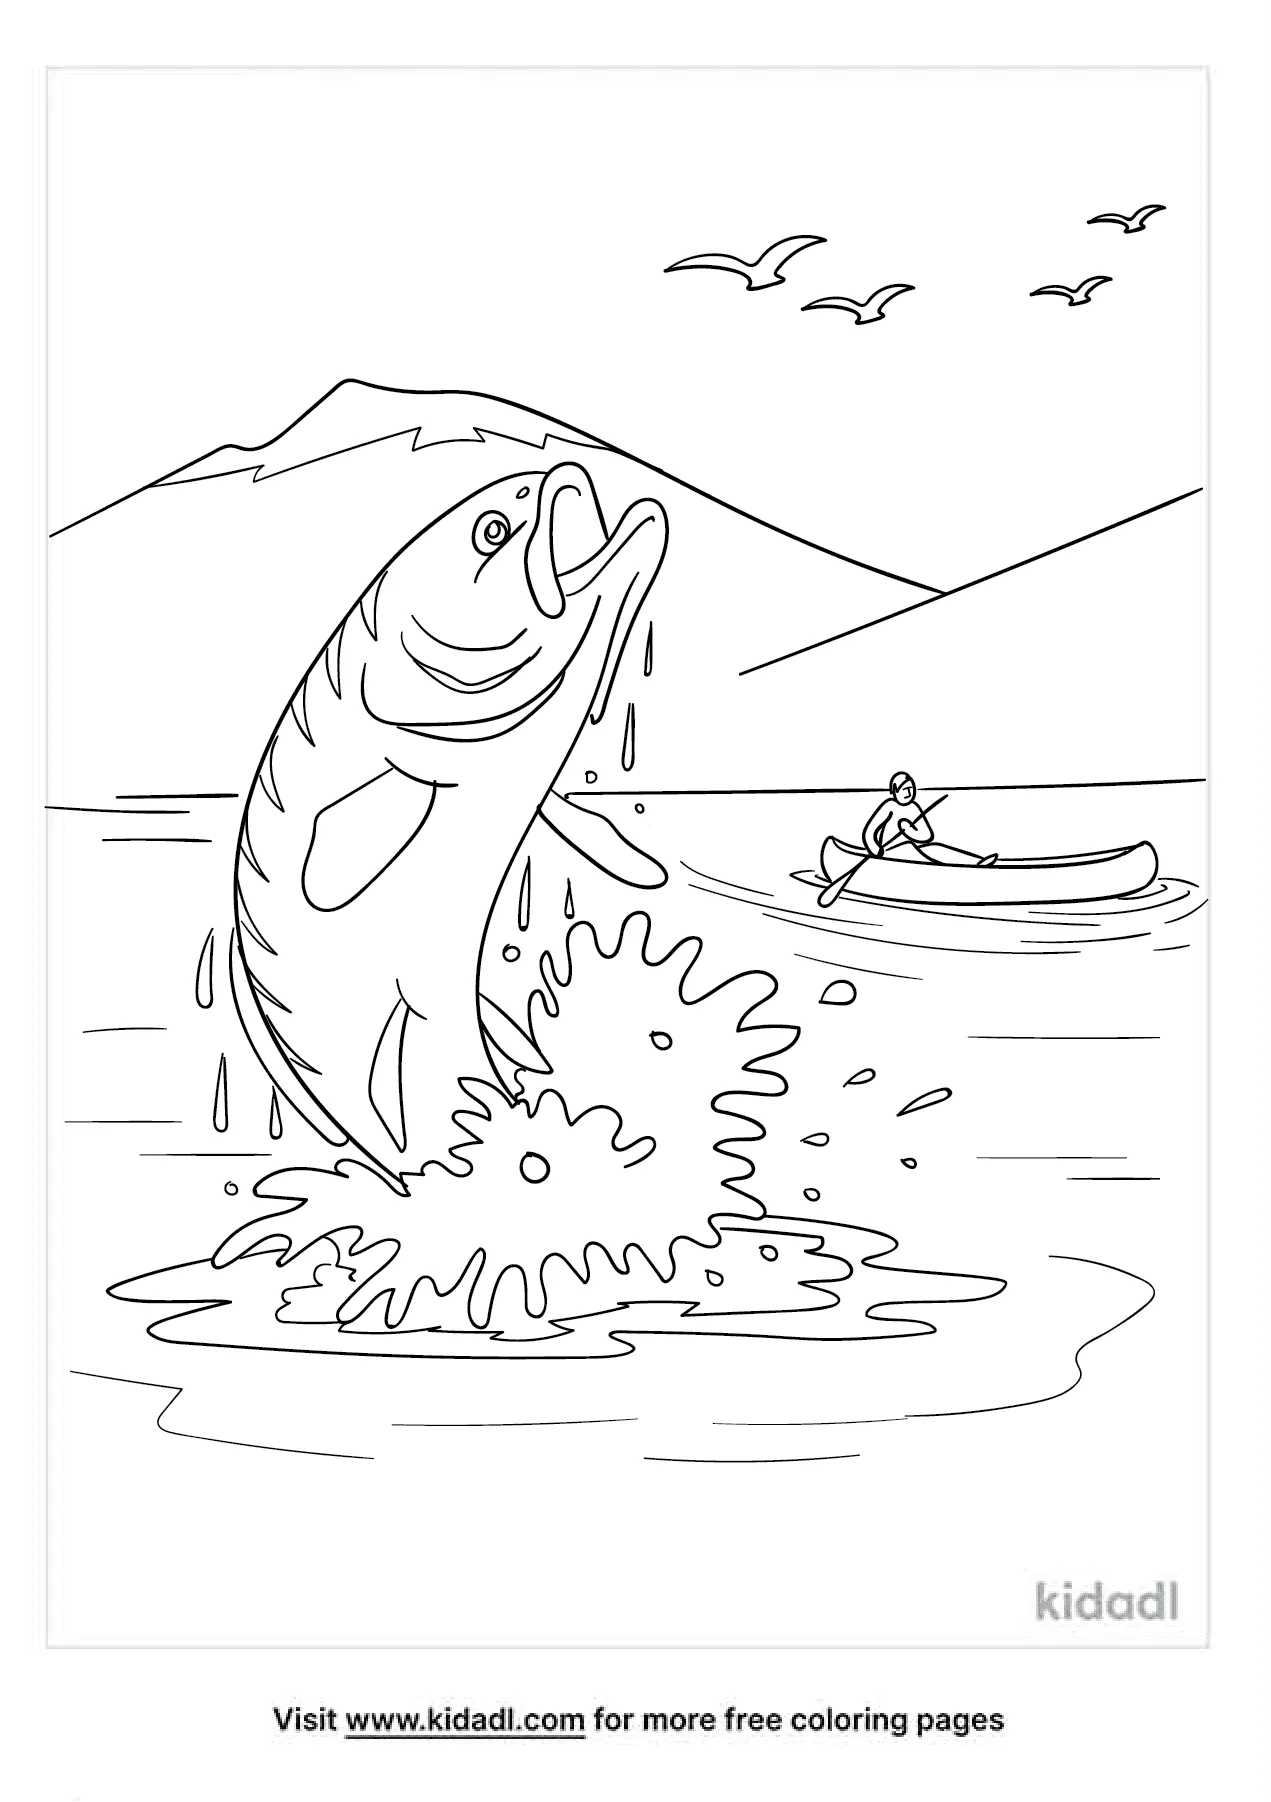 Alaska Coloring Pages Free World Geography Flags Coloring Pages Kidadl